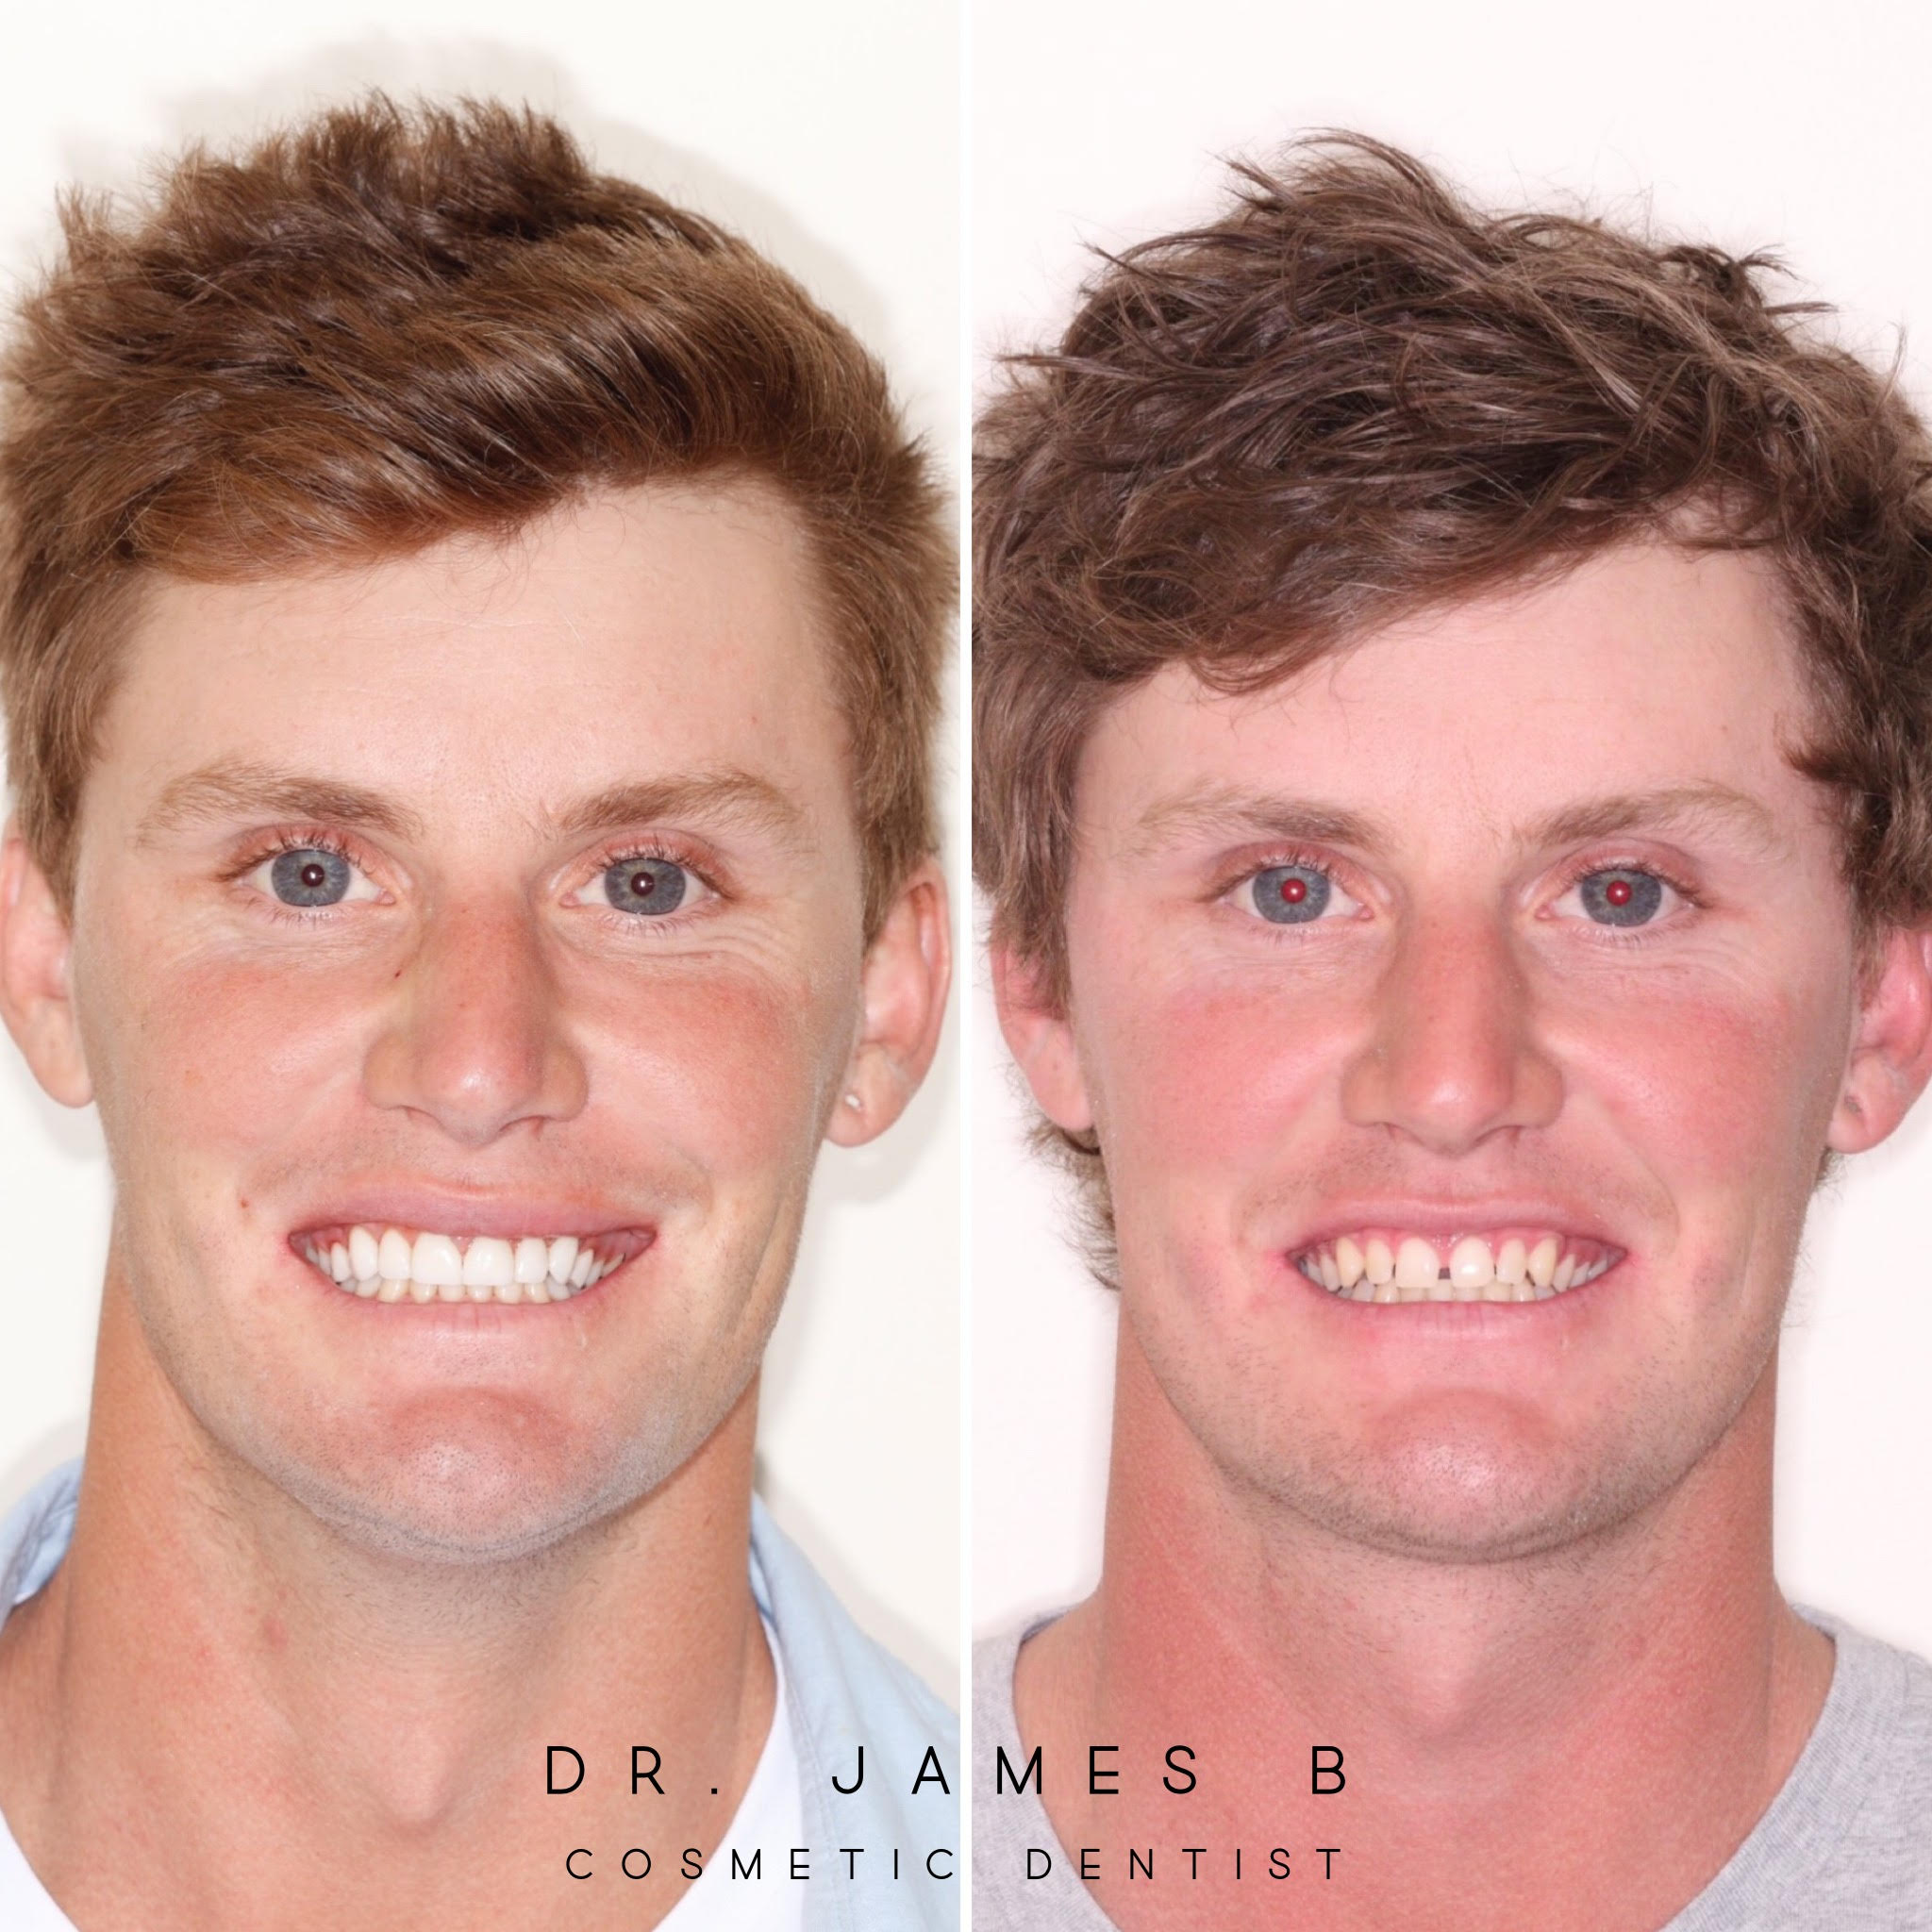 Teeth Whitening Before & After